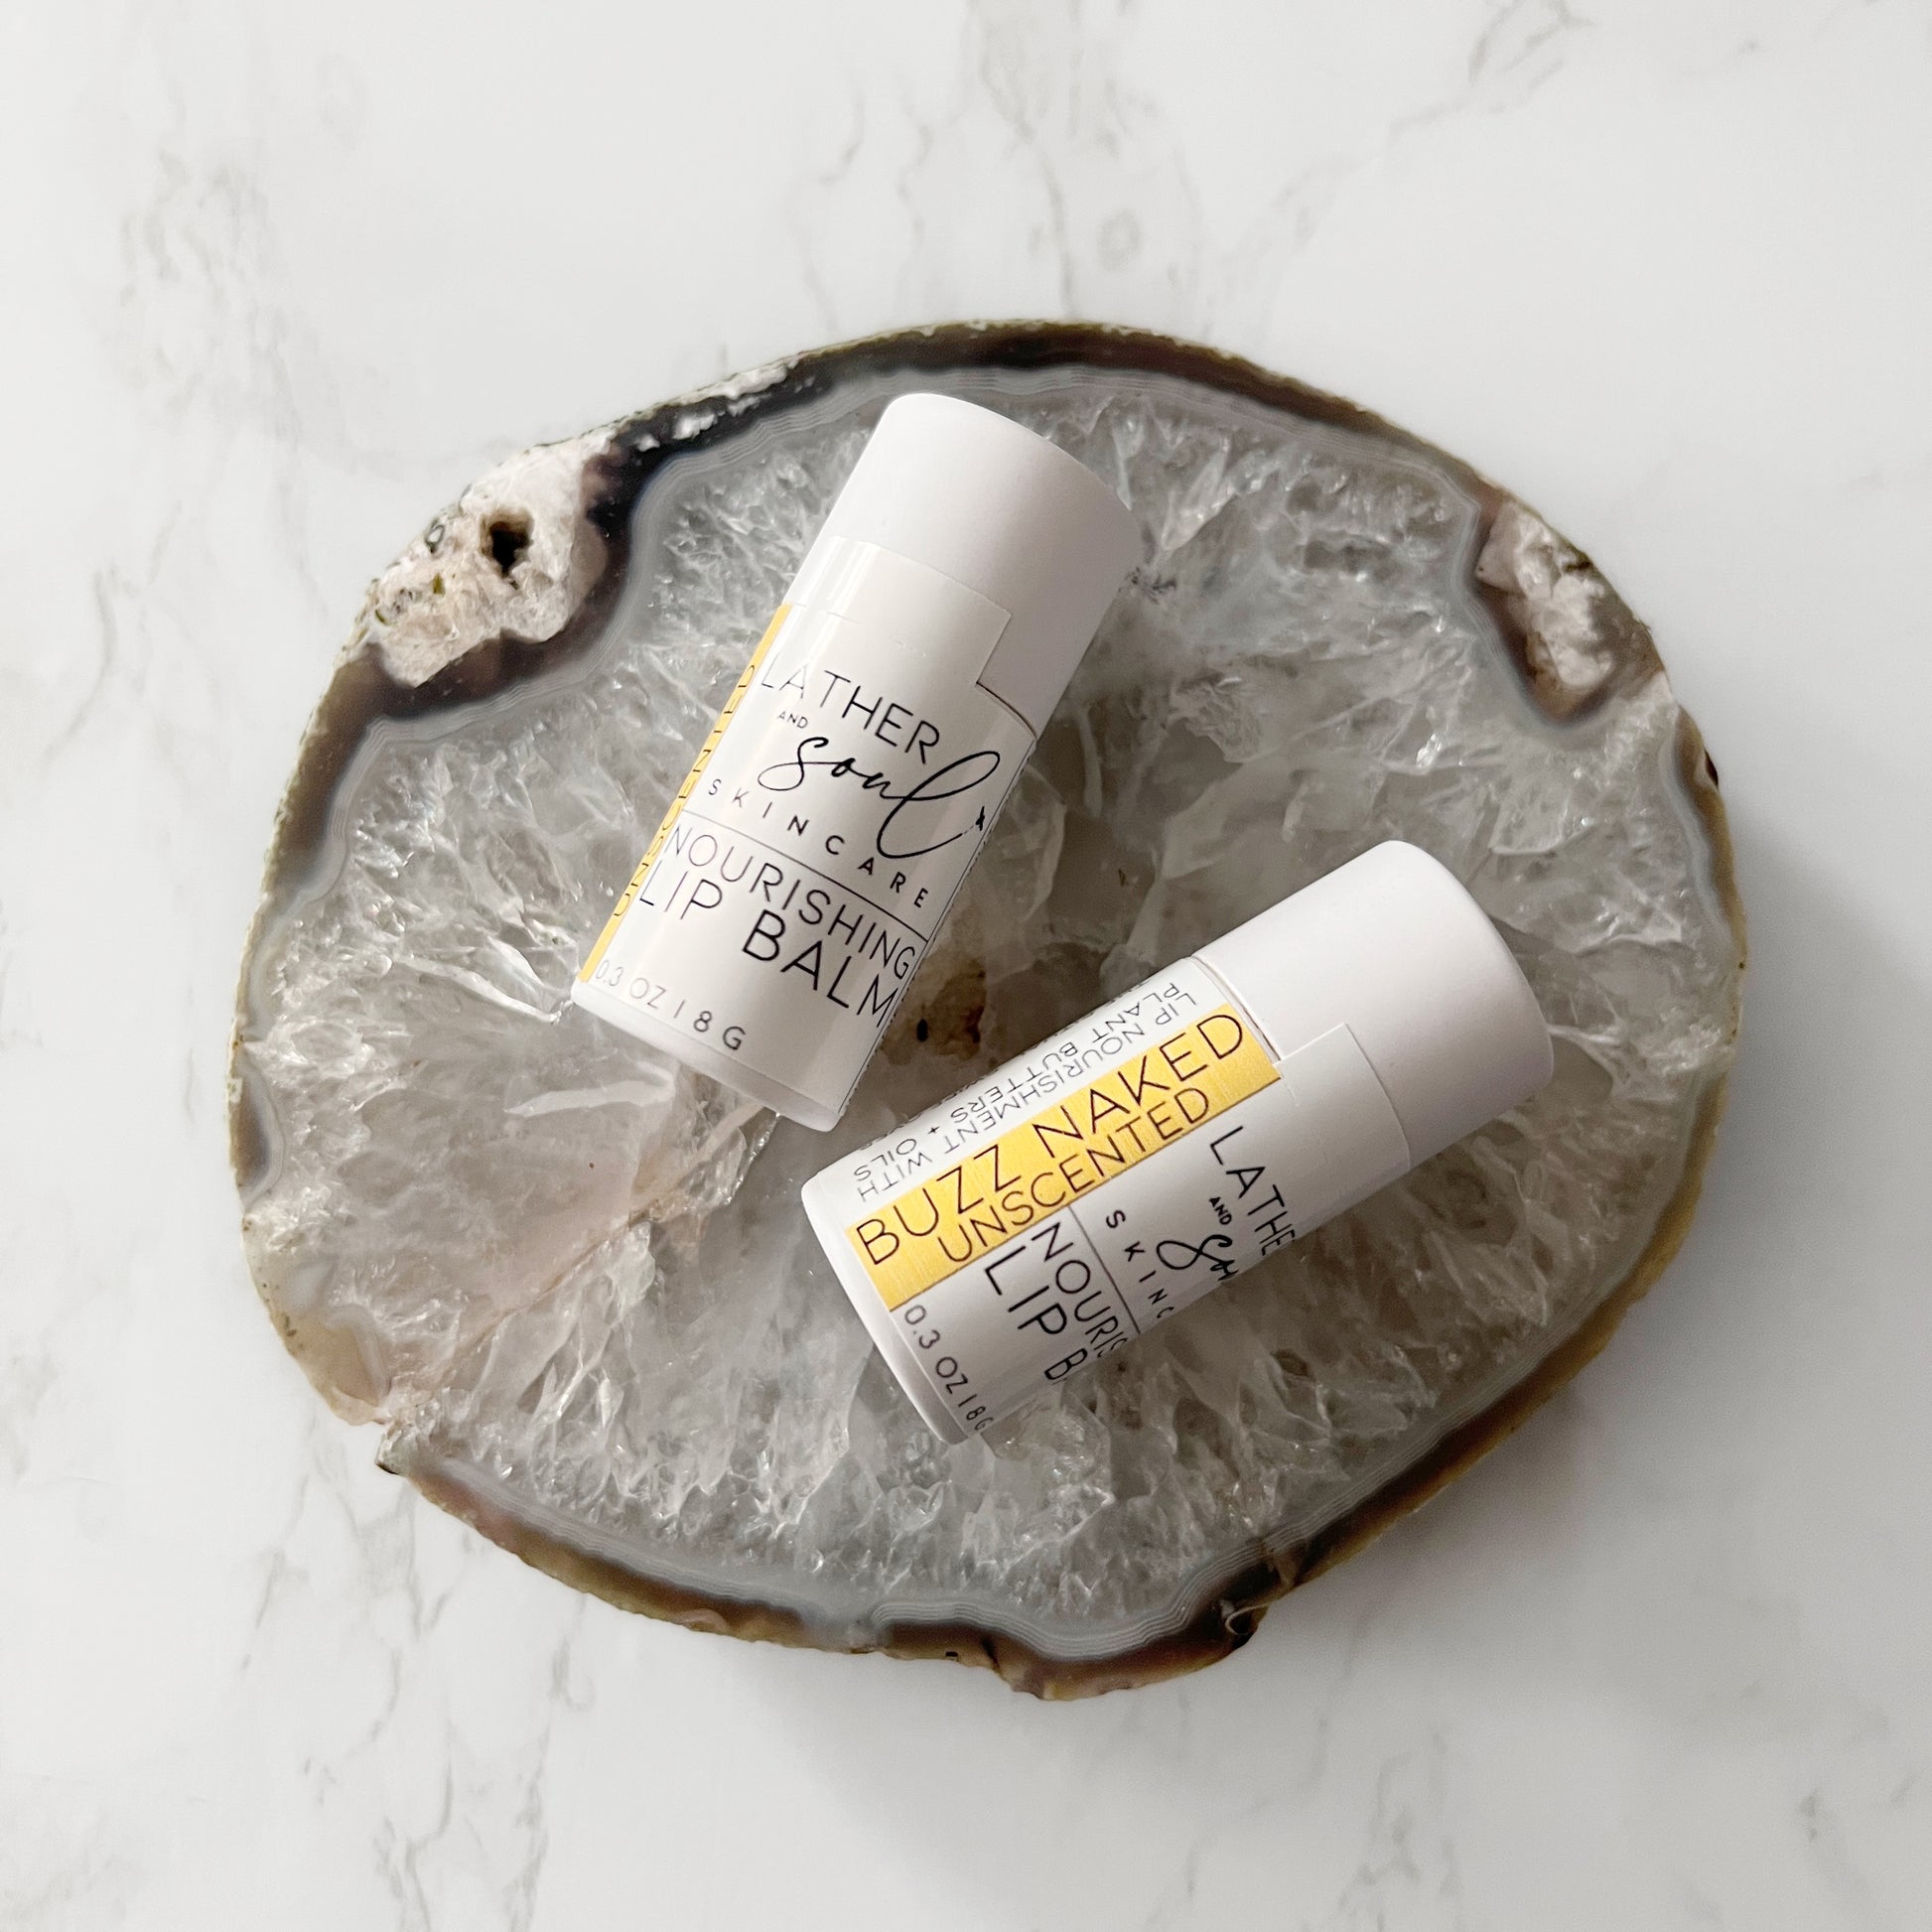 Unscented organic lip balm from Lather + Soul.